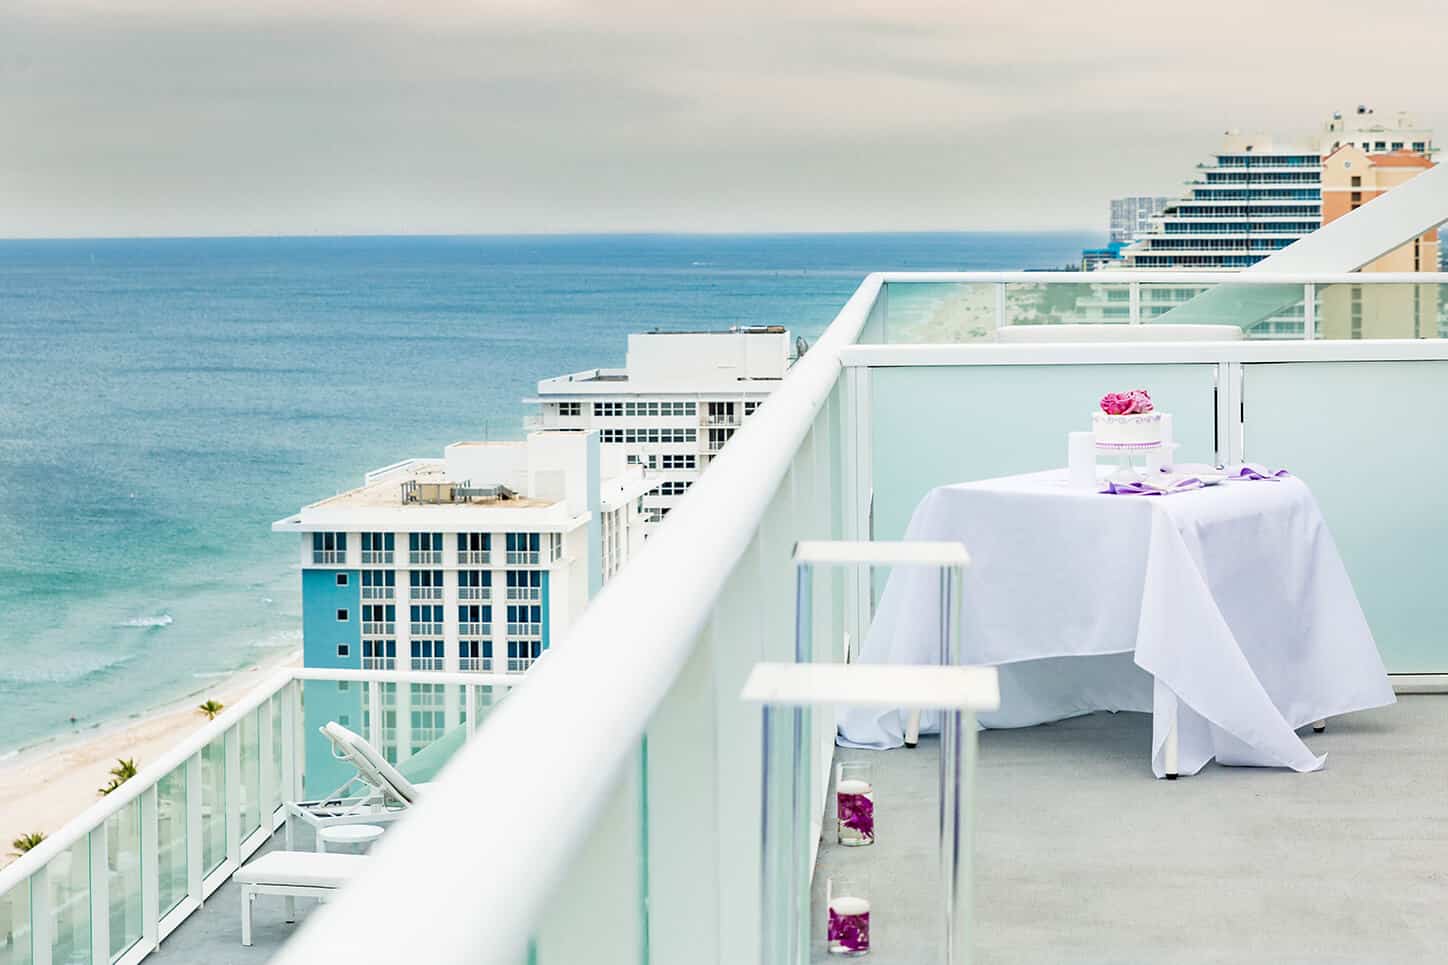 Photo of luxury hotel overlooking beach | Miami wedding venues by White House Wedding Photography